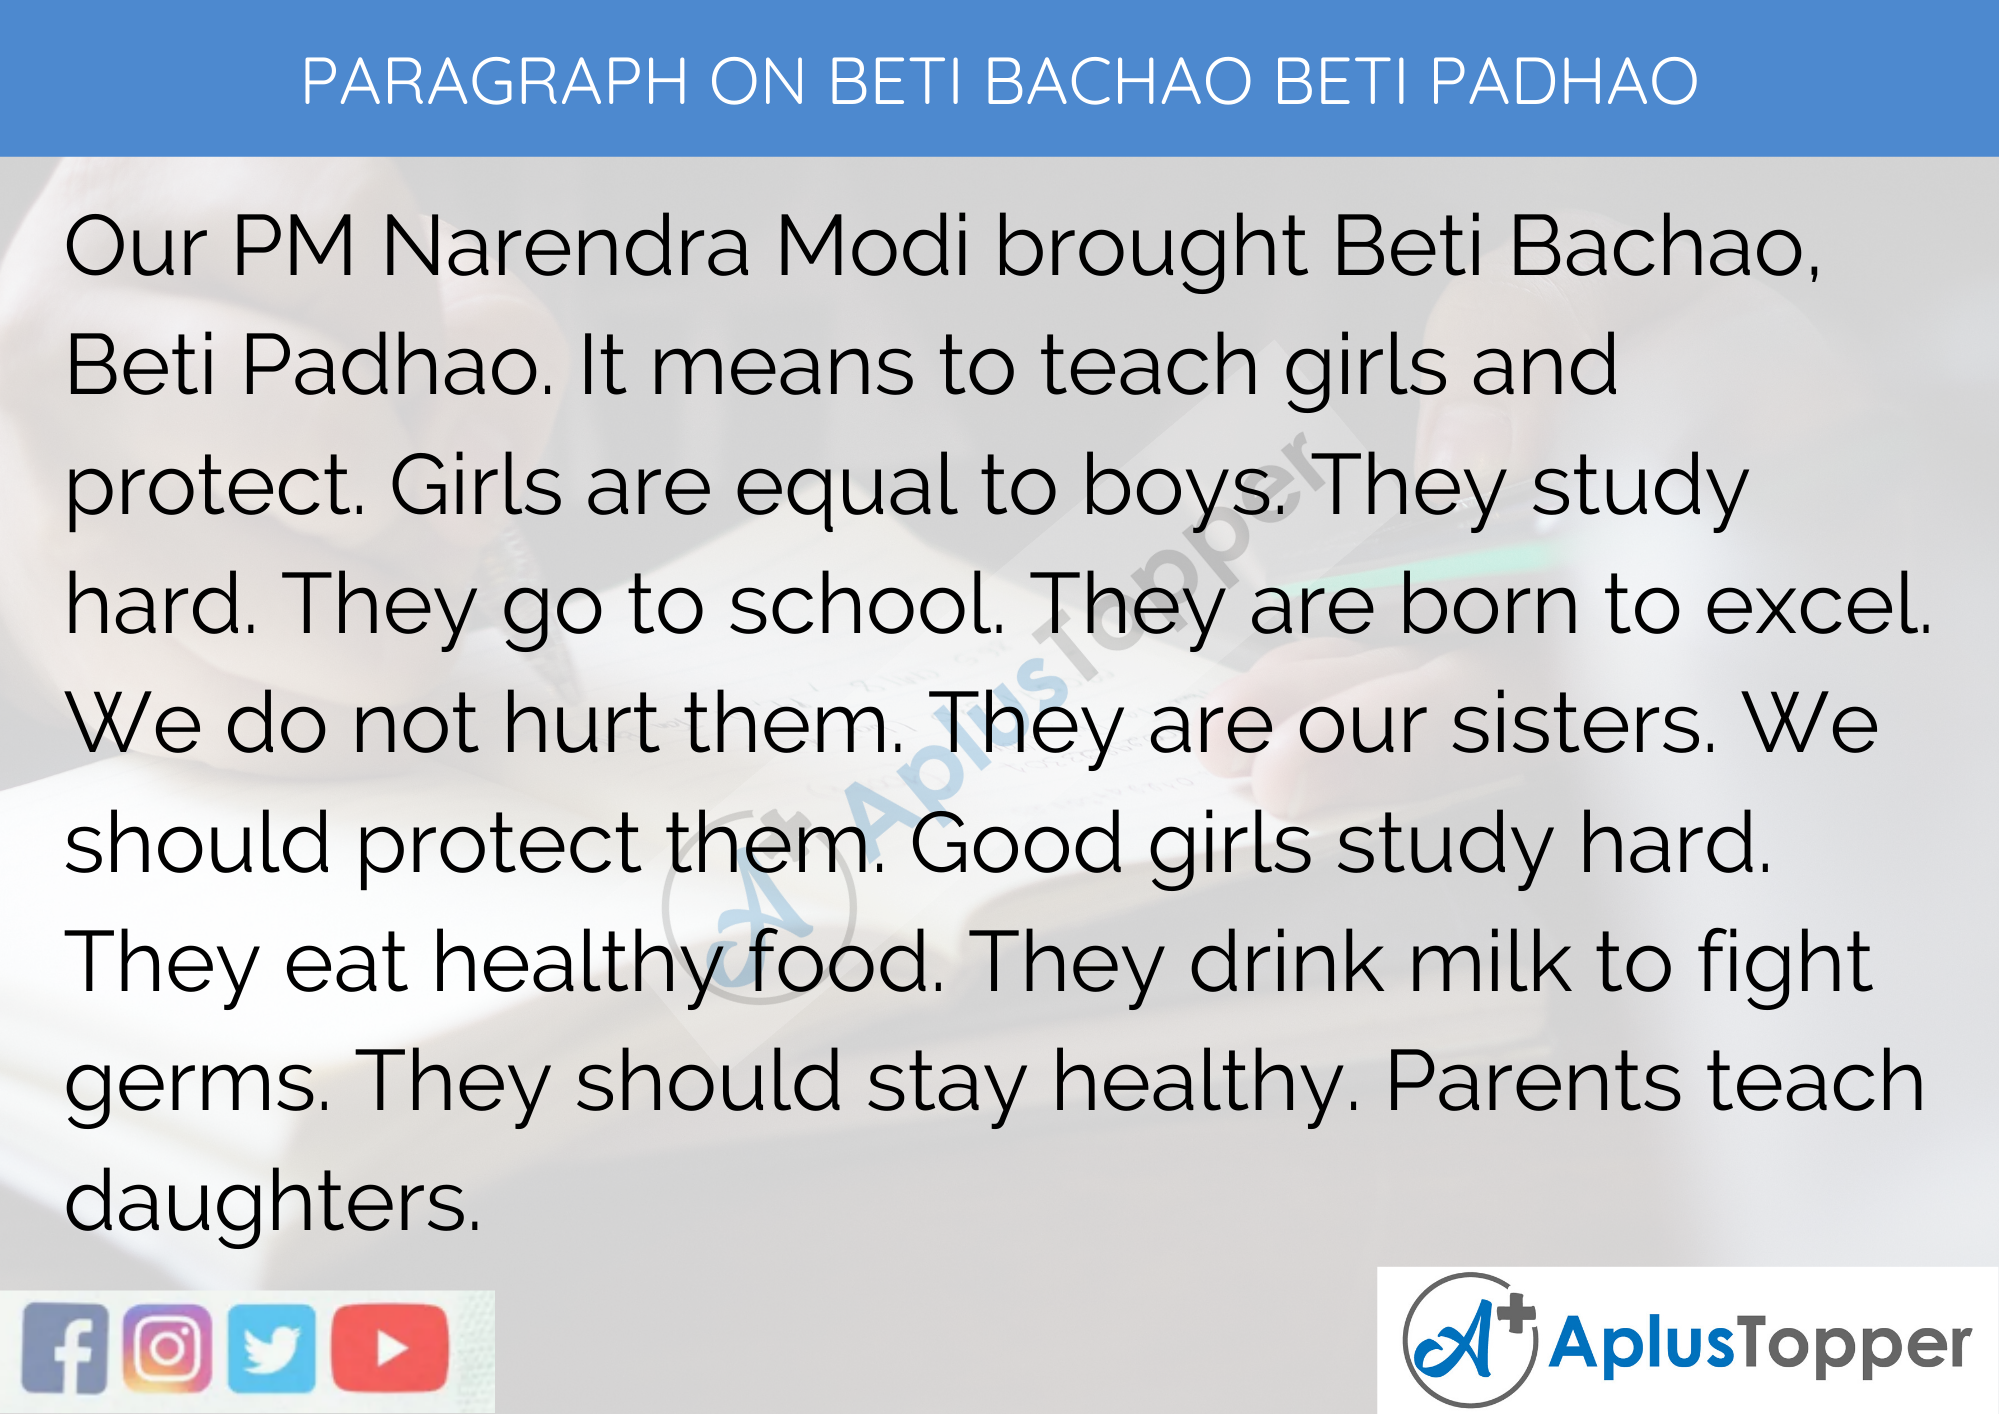 Paragraph on Beti Bachao Beti Padhao - 100 Words for Classes 1, 2 and 3 Kids